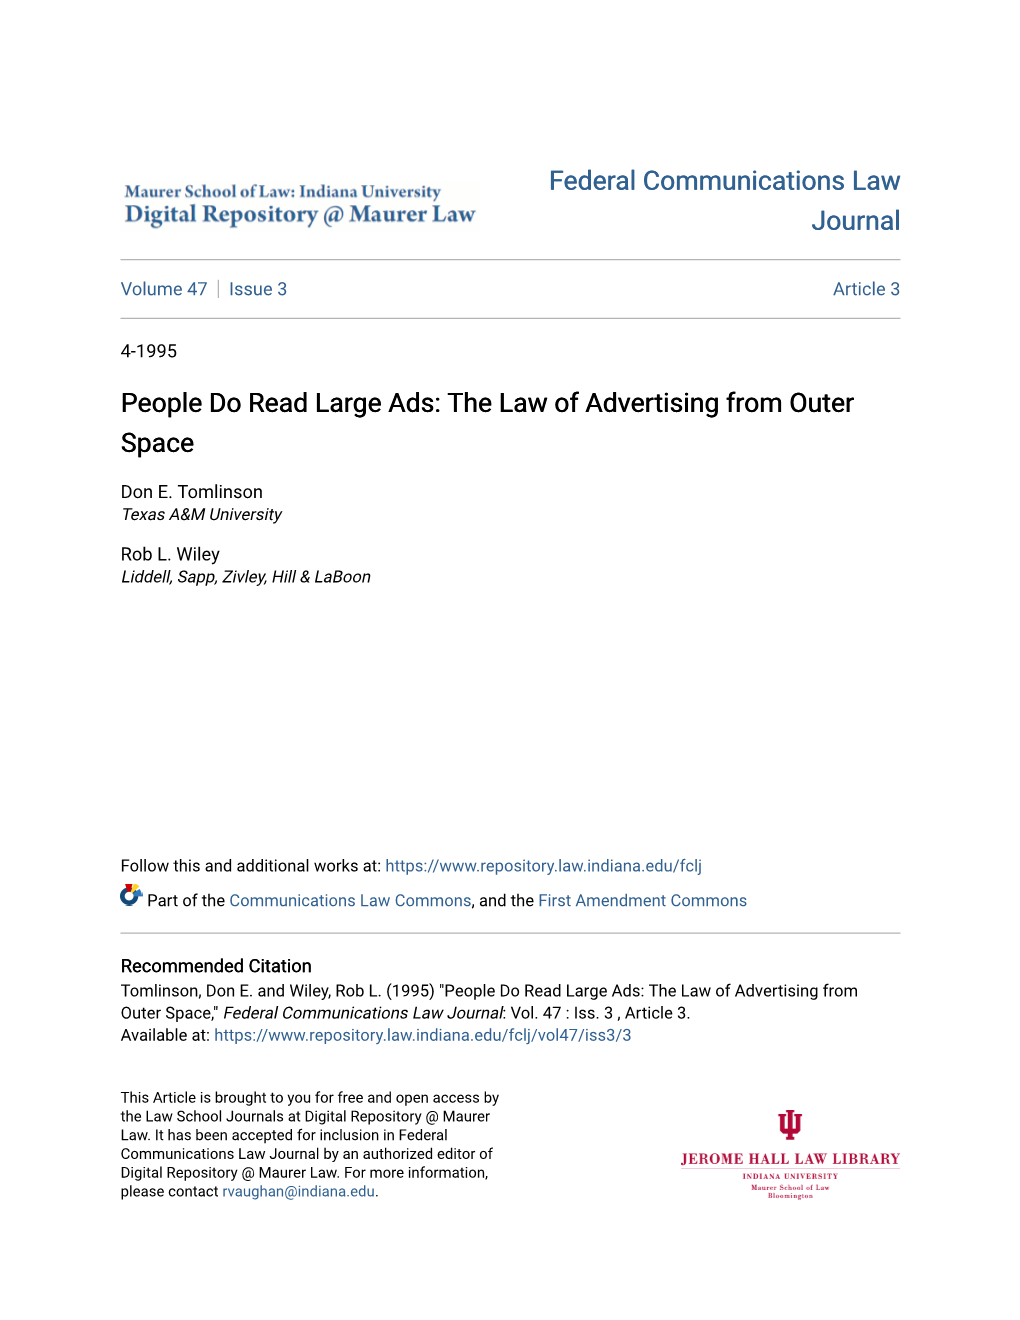 People Do Read Large Ads: the Law of Advertising from Outer Space